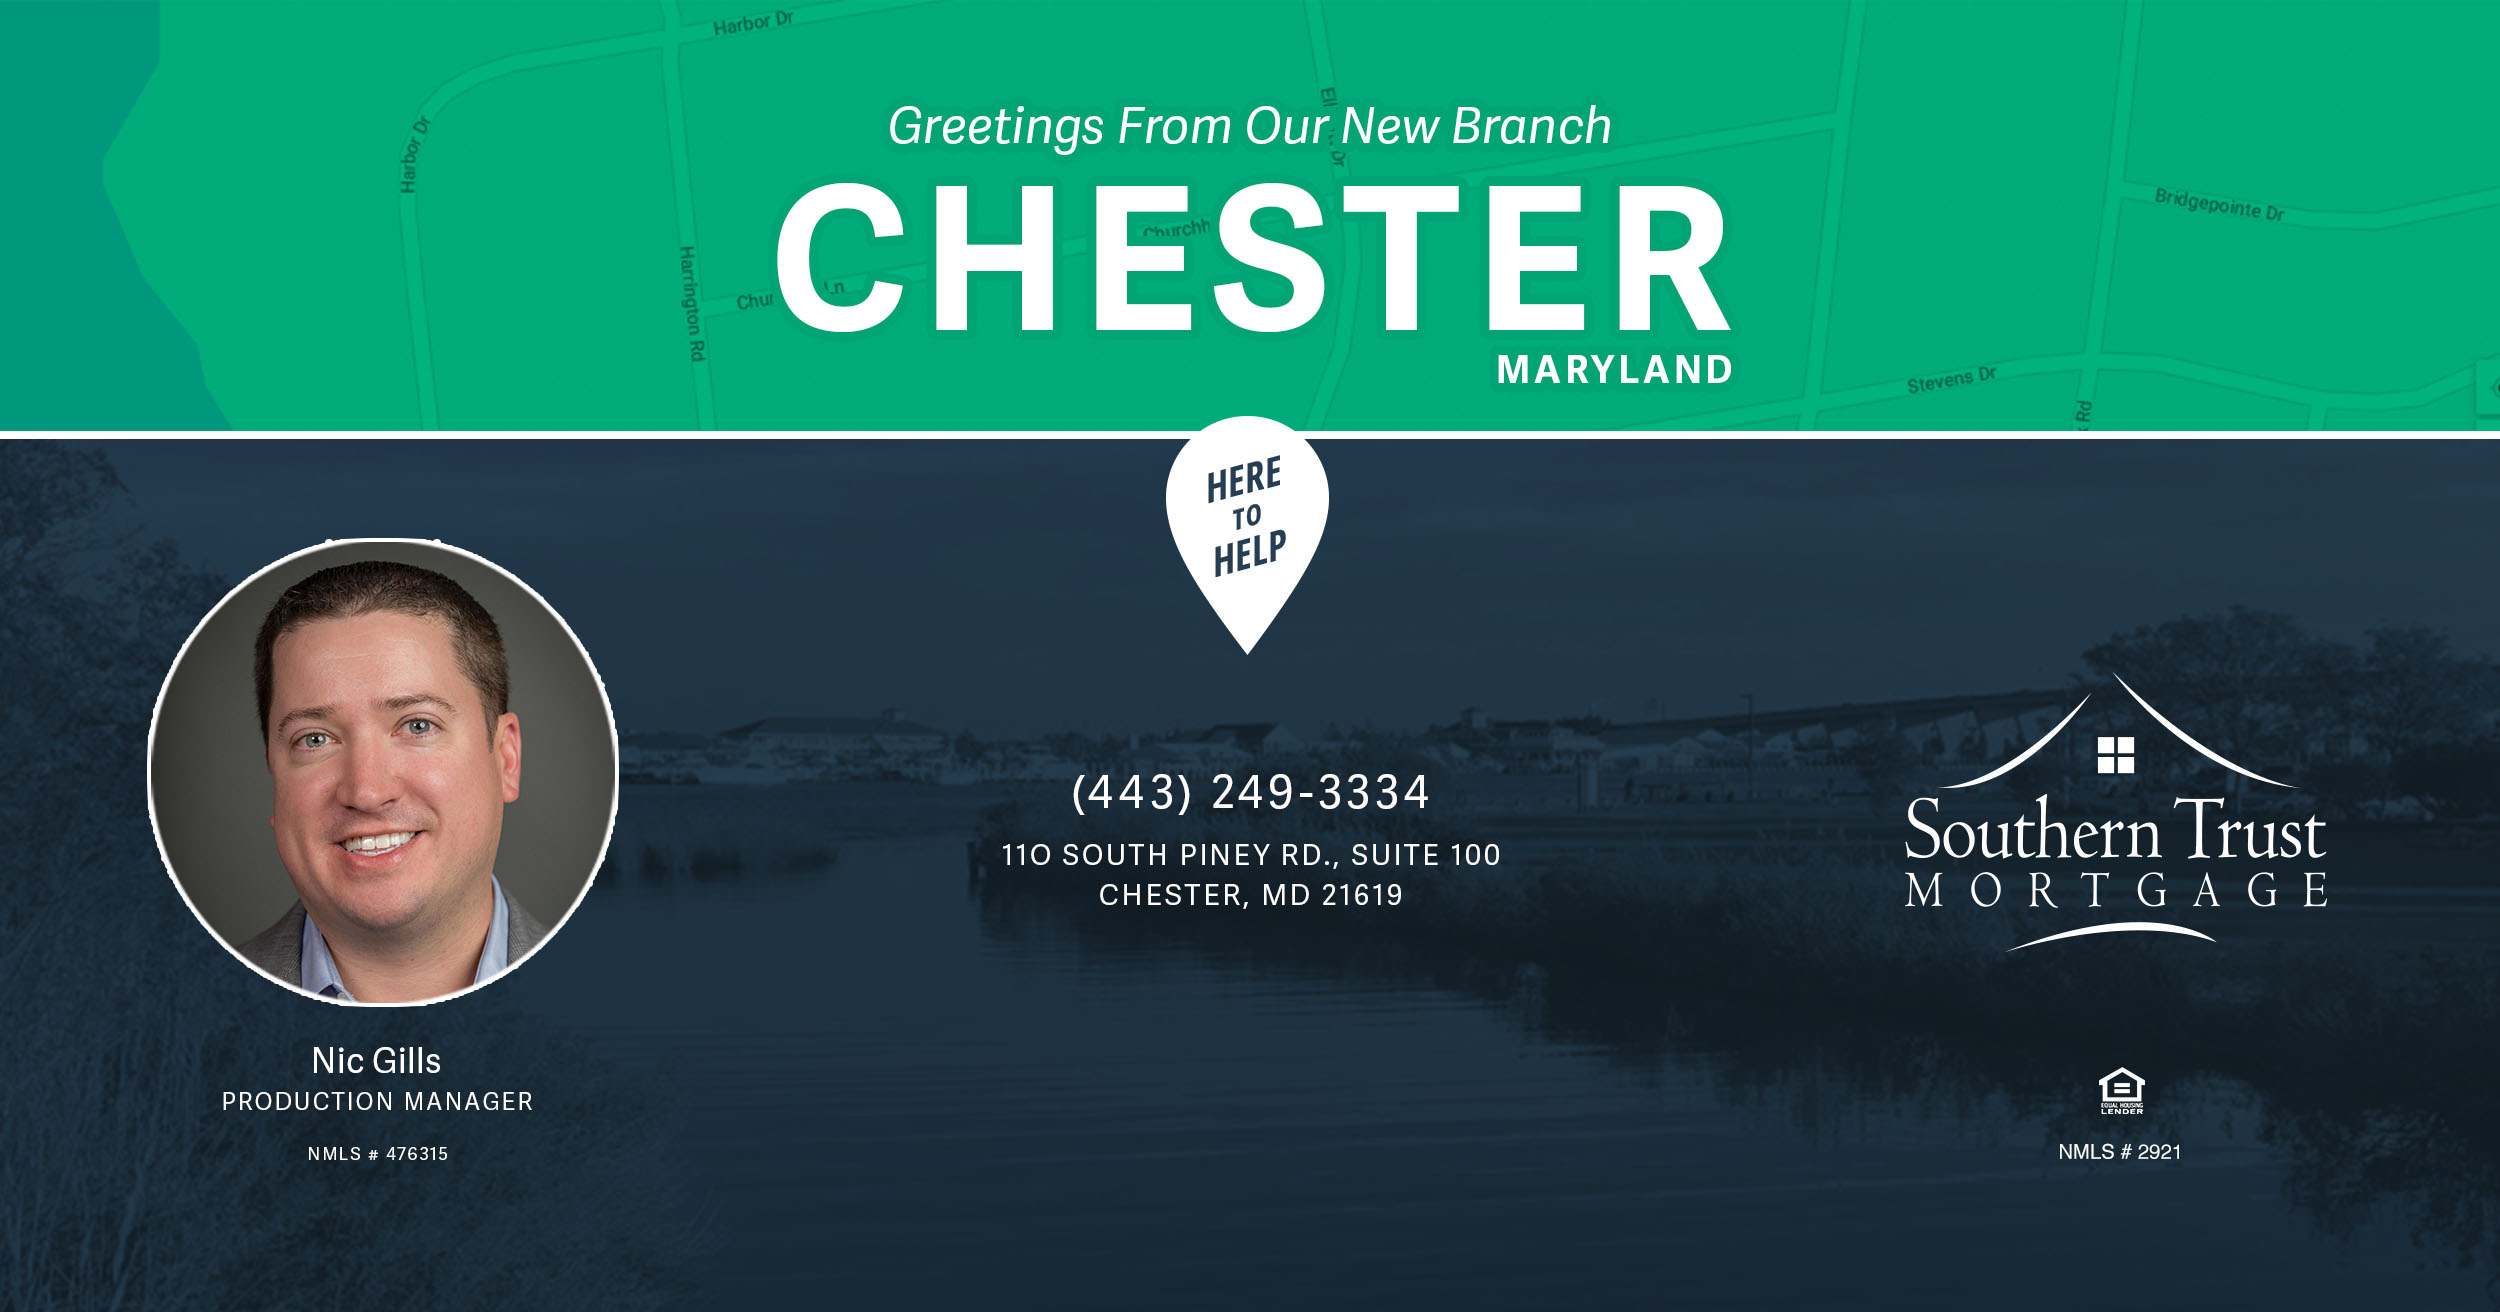 Southern Trust Mortgage adds Chester, Maryland Branch